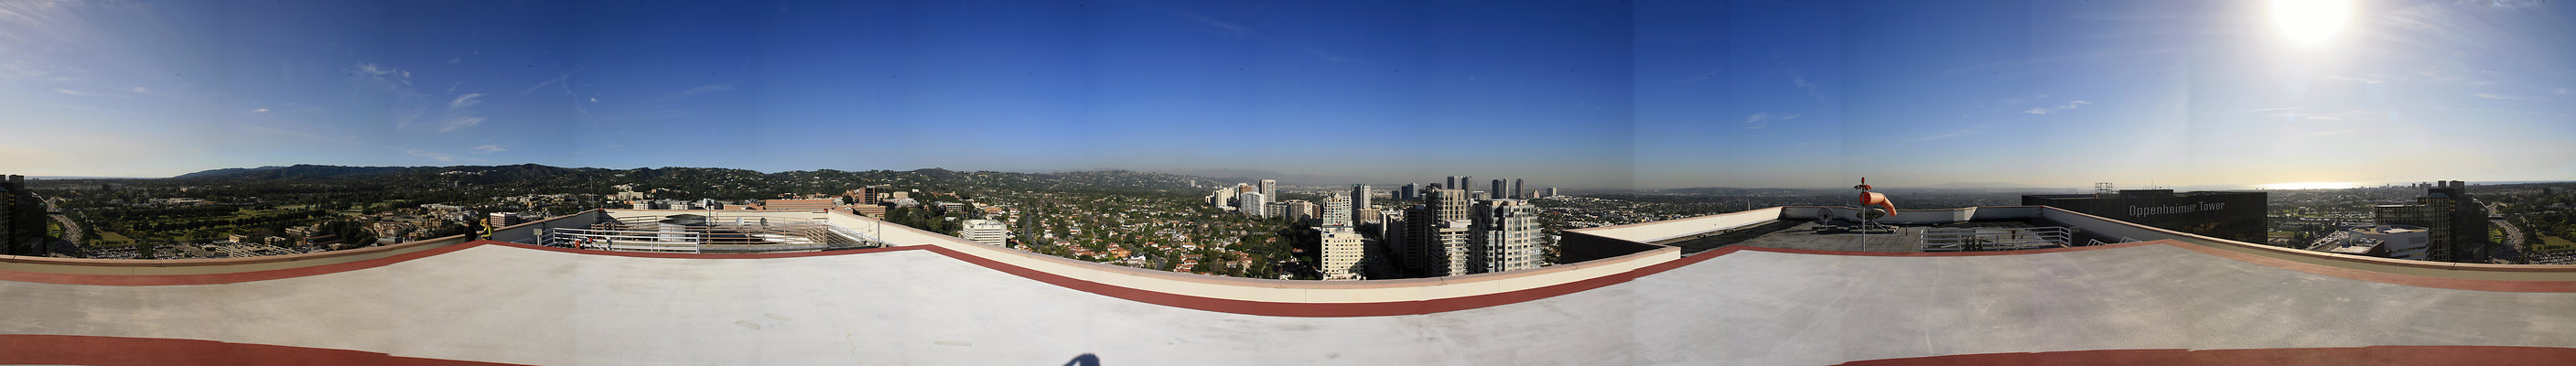 View from Helipad 360 pan